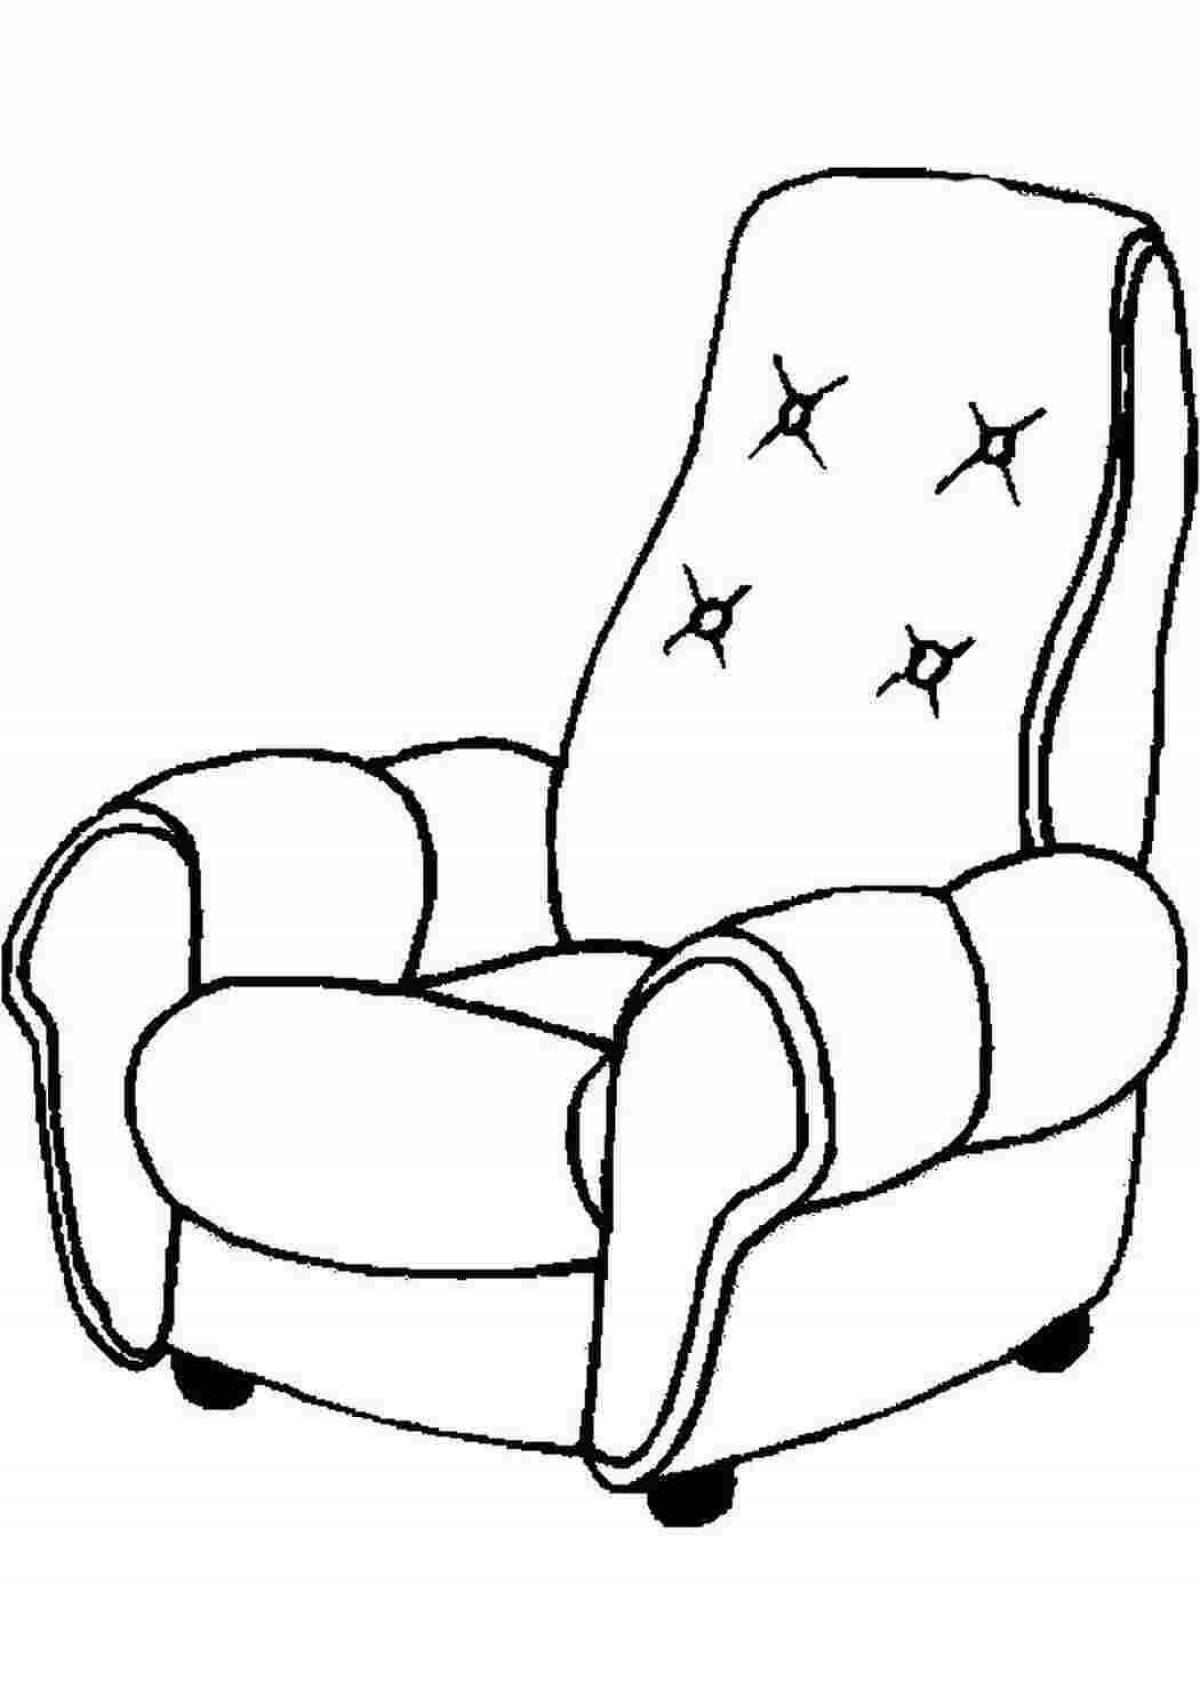 Adorable armchair coloring page for 3-4 year olds